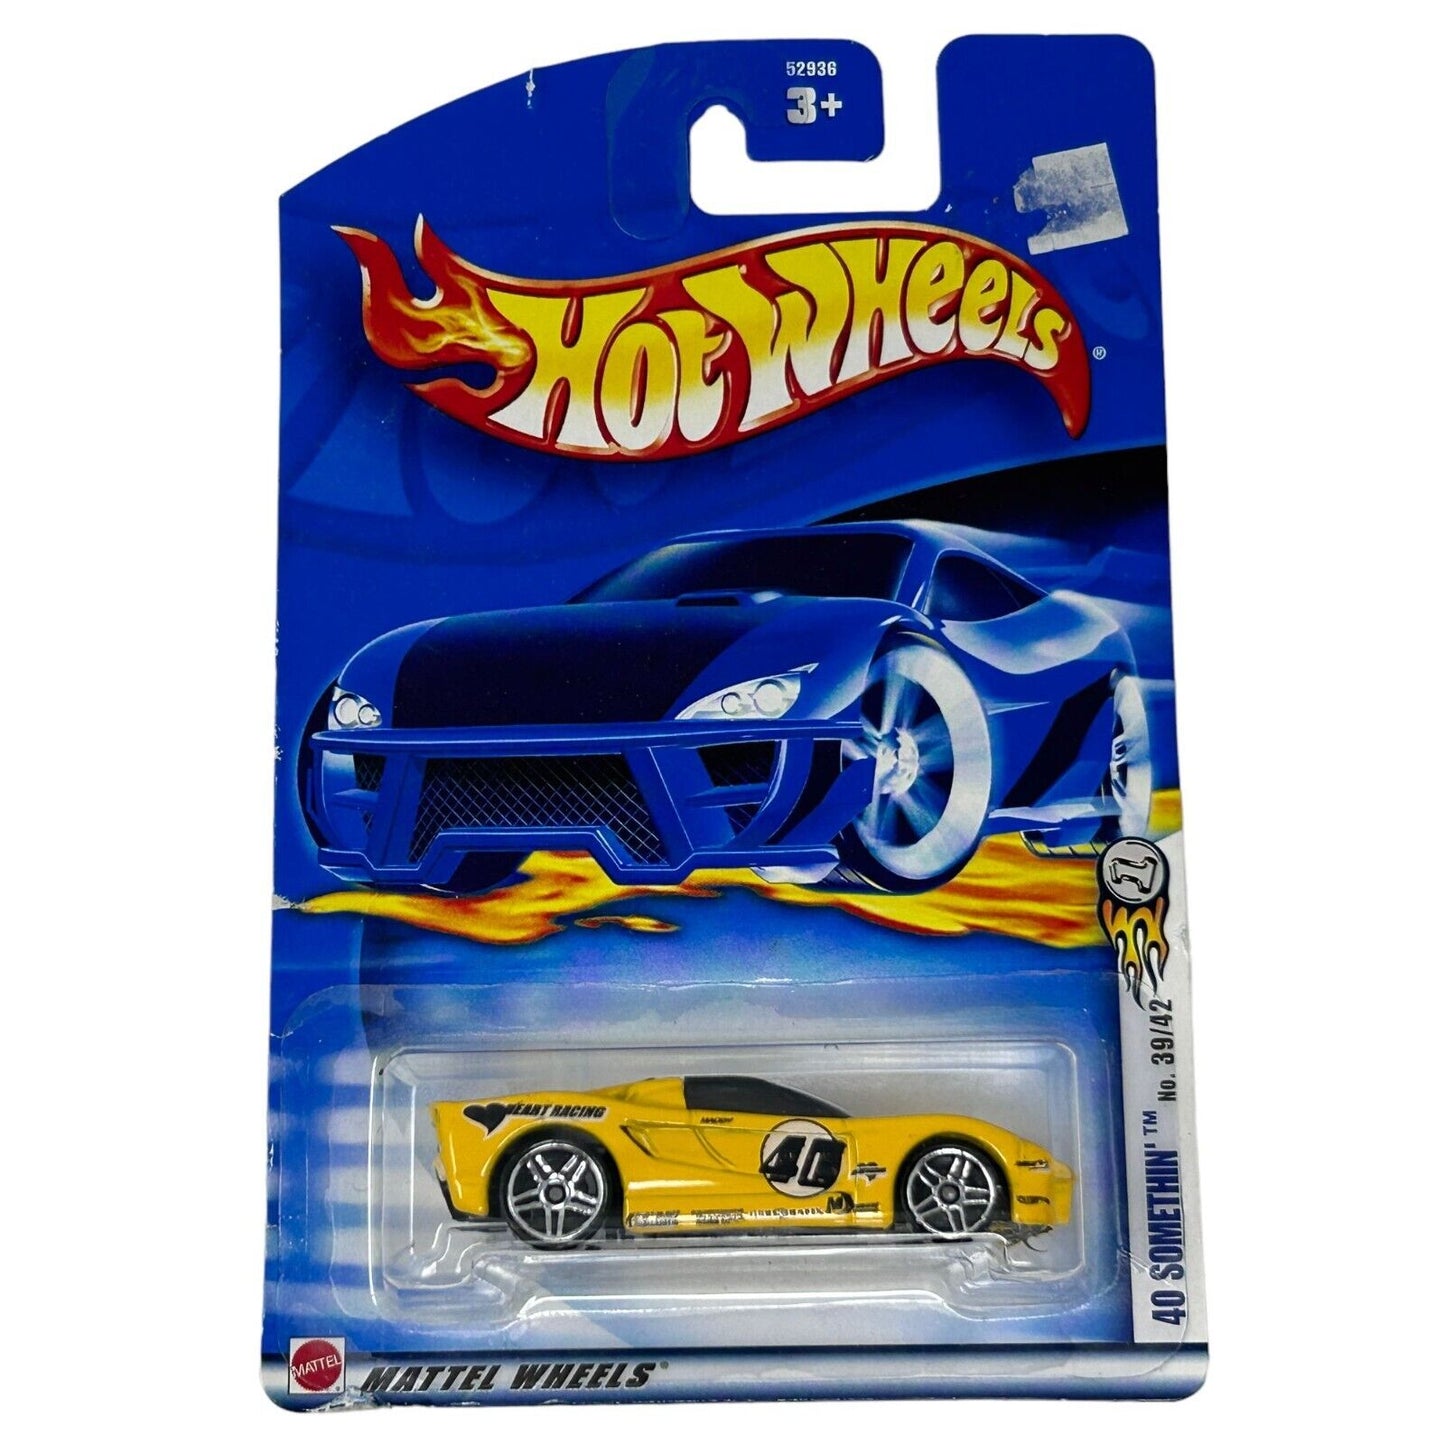 40 Somethin Hot Wheels Collectible Diecast Car Yellow Vintage 2002 New